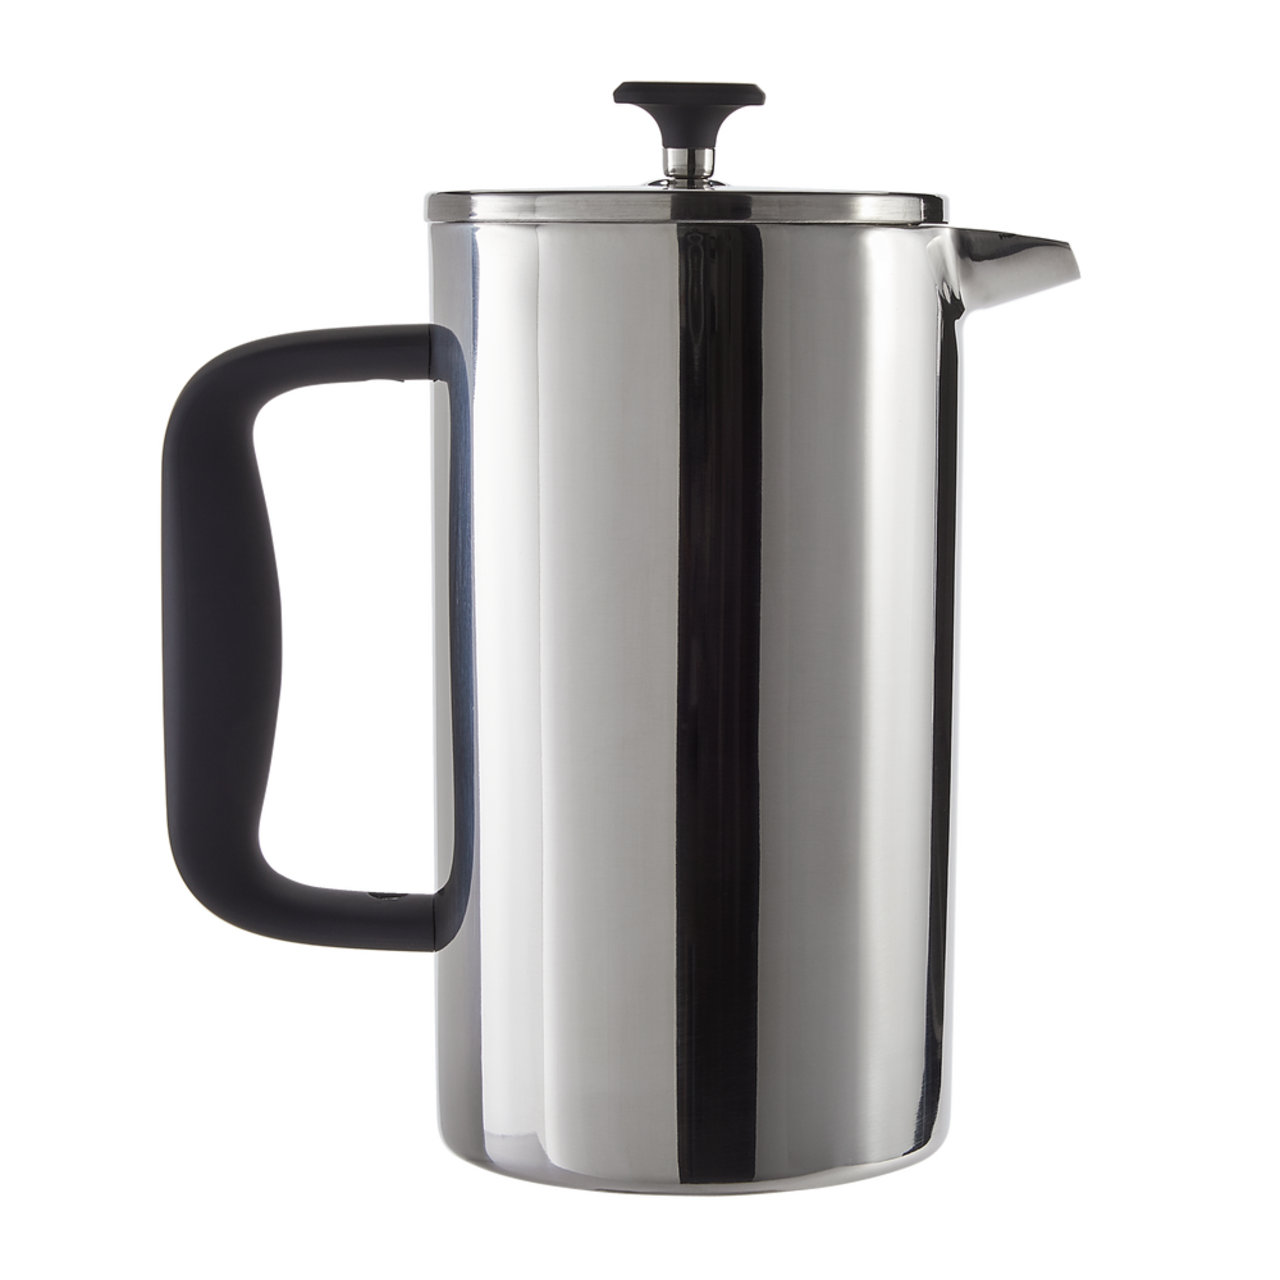 https://media-www.canadiantire.ca/product/living/kitchen/dining-and-entertaining/1425859/paderno-stainless-steel-french-press-e3bc09ba-92a5-45ed-9fe7-99901fbbf240.png?imdensity=1&imwidth=640&impolicy=mZoom